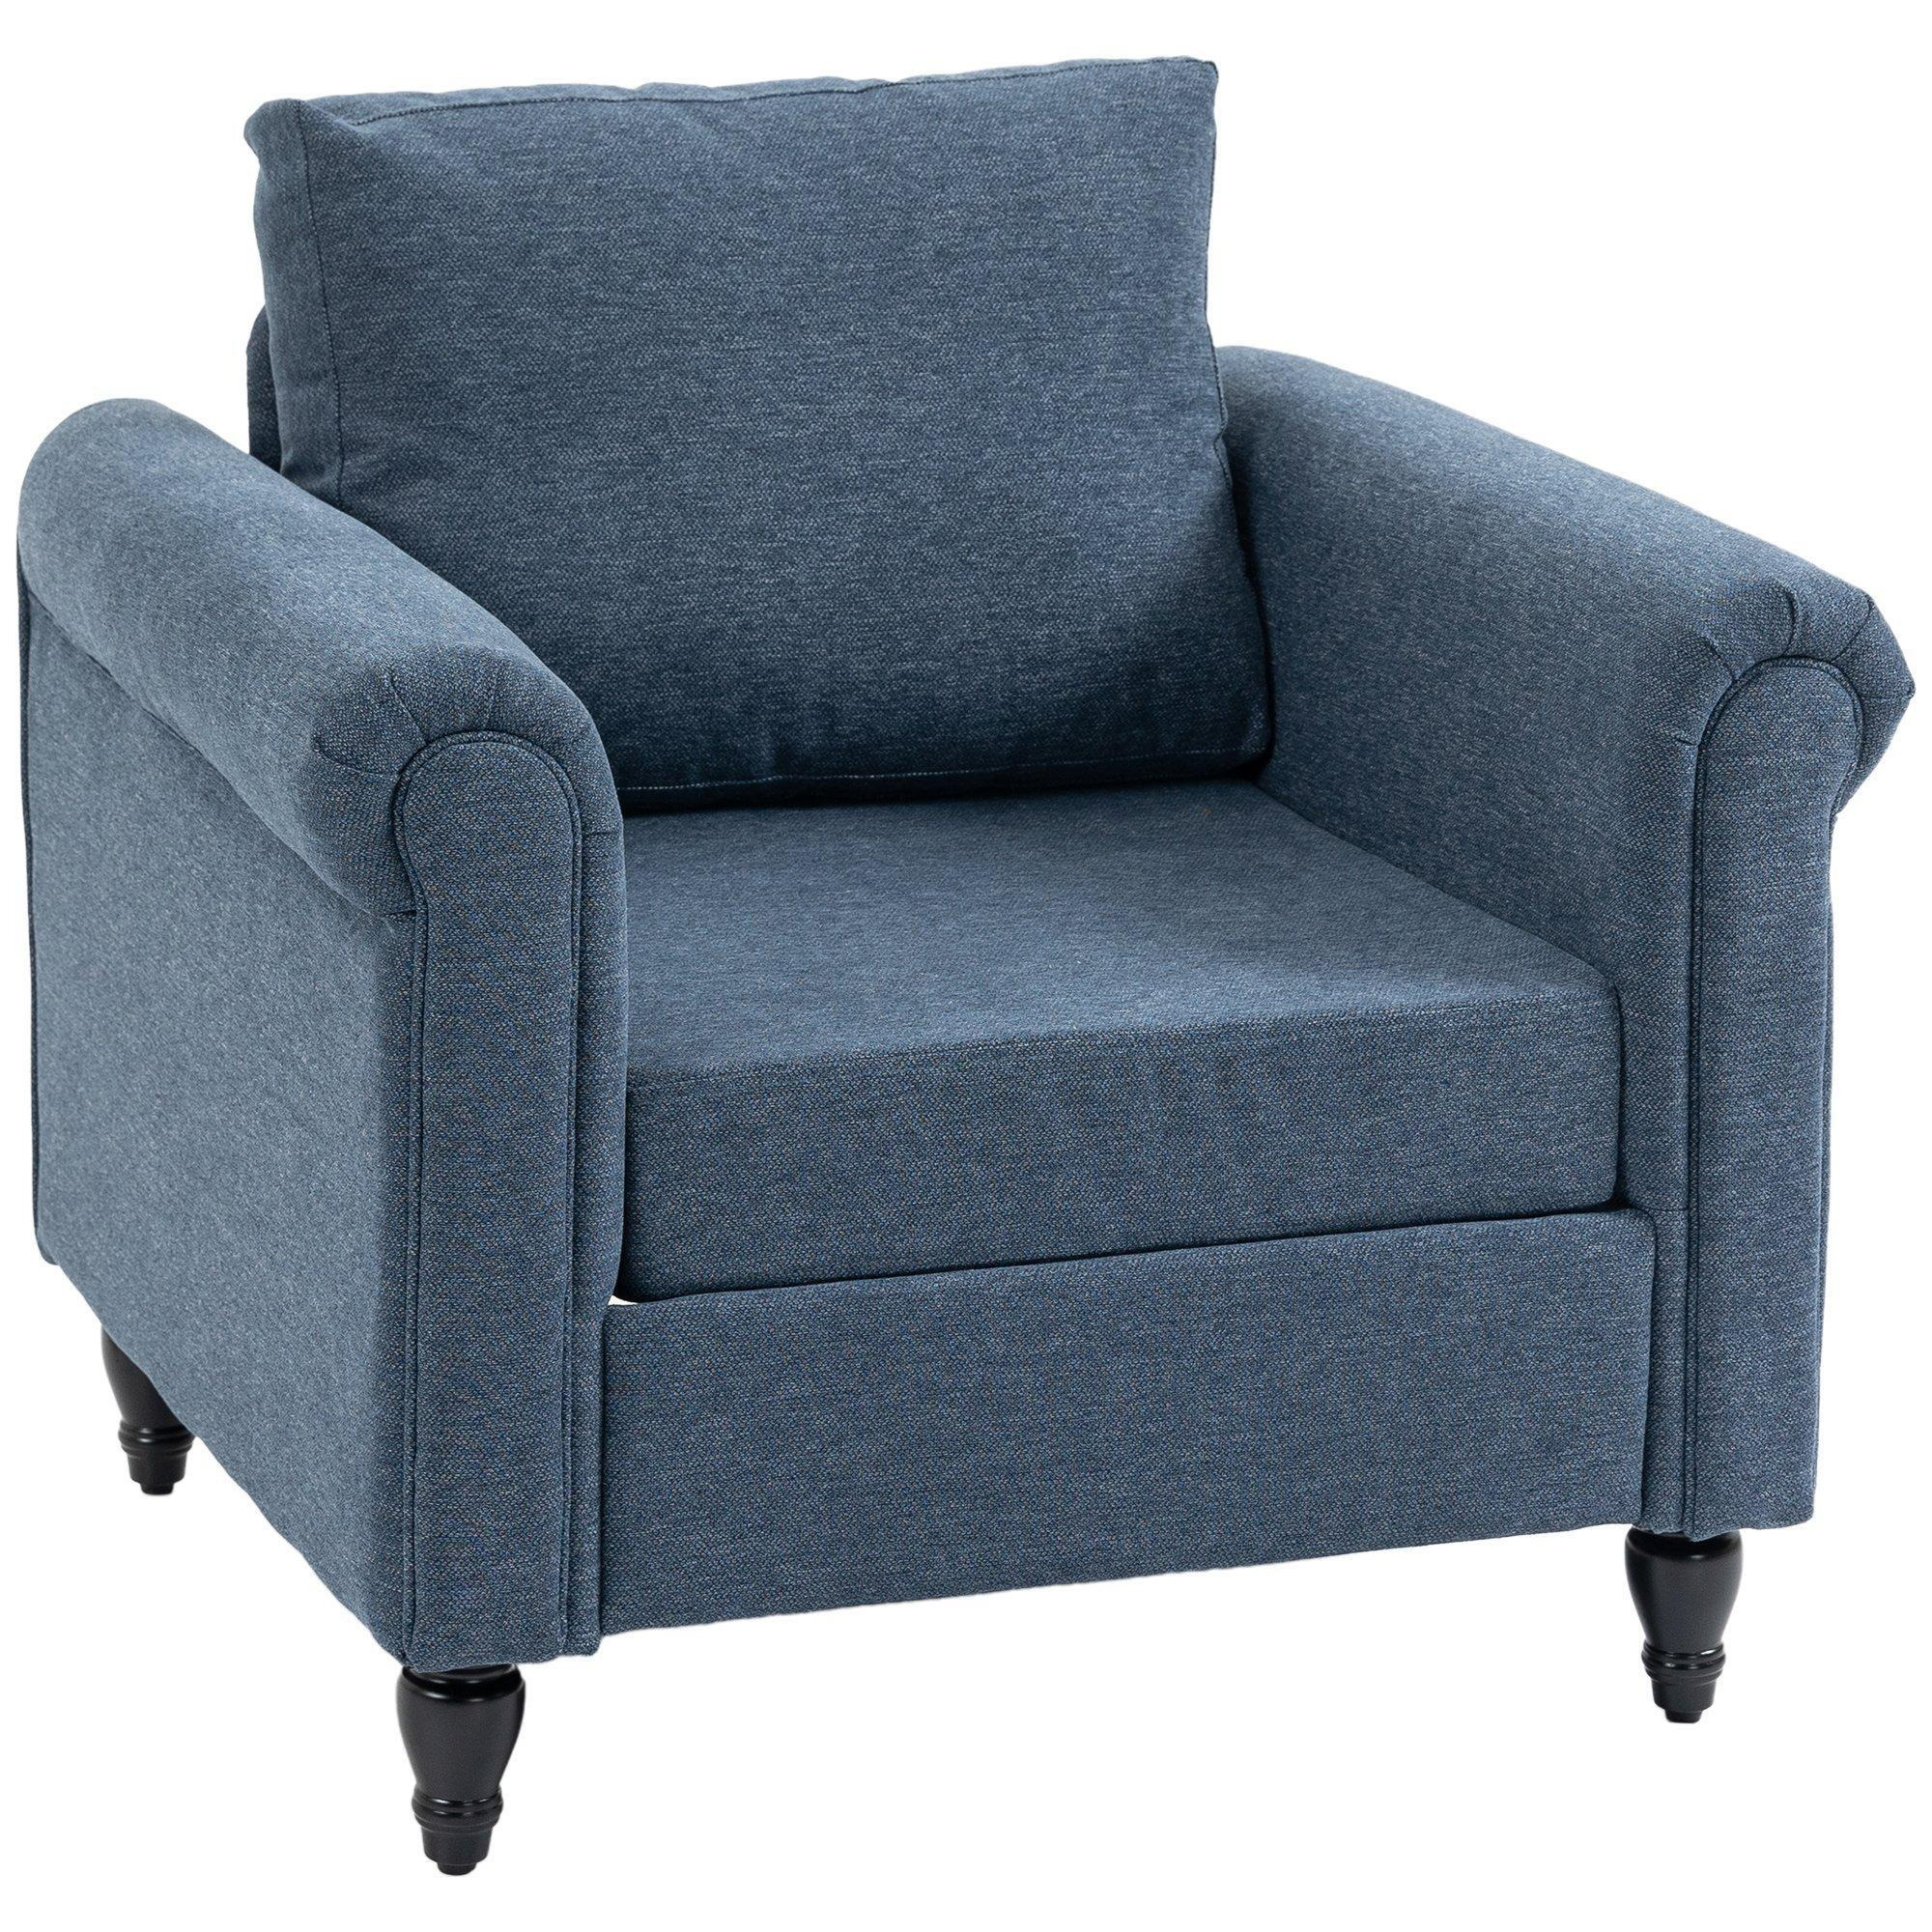 Upholstered Accent Chair for Living Room Vintage Armchair Rolled Arms - image 1